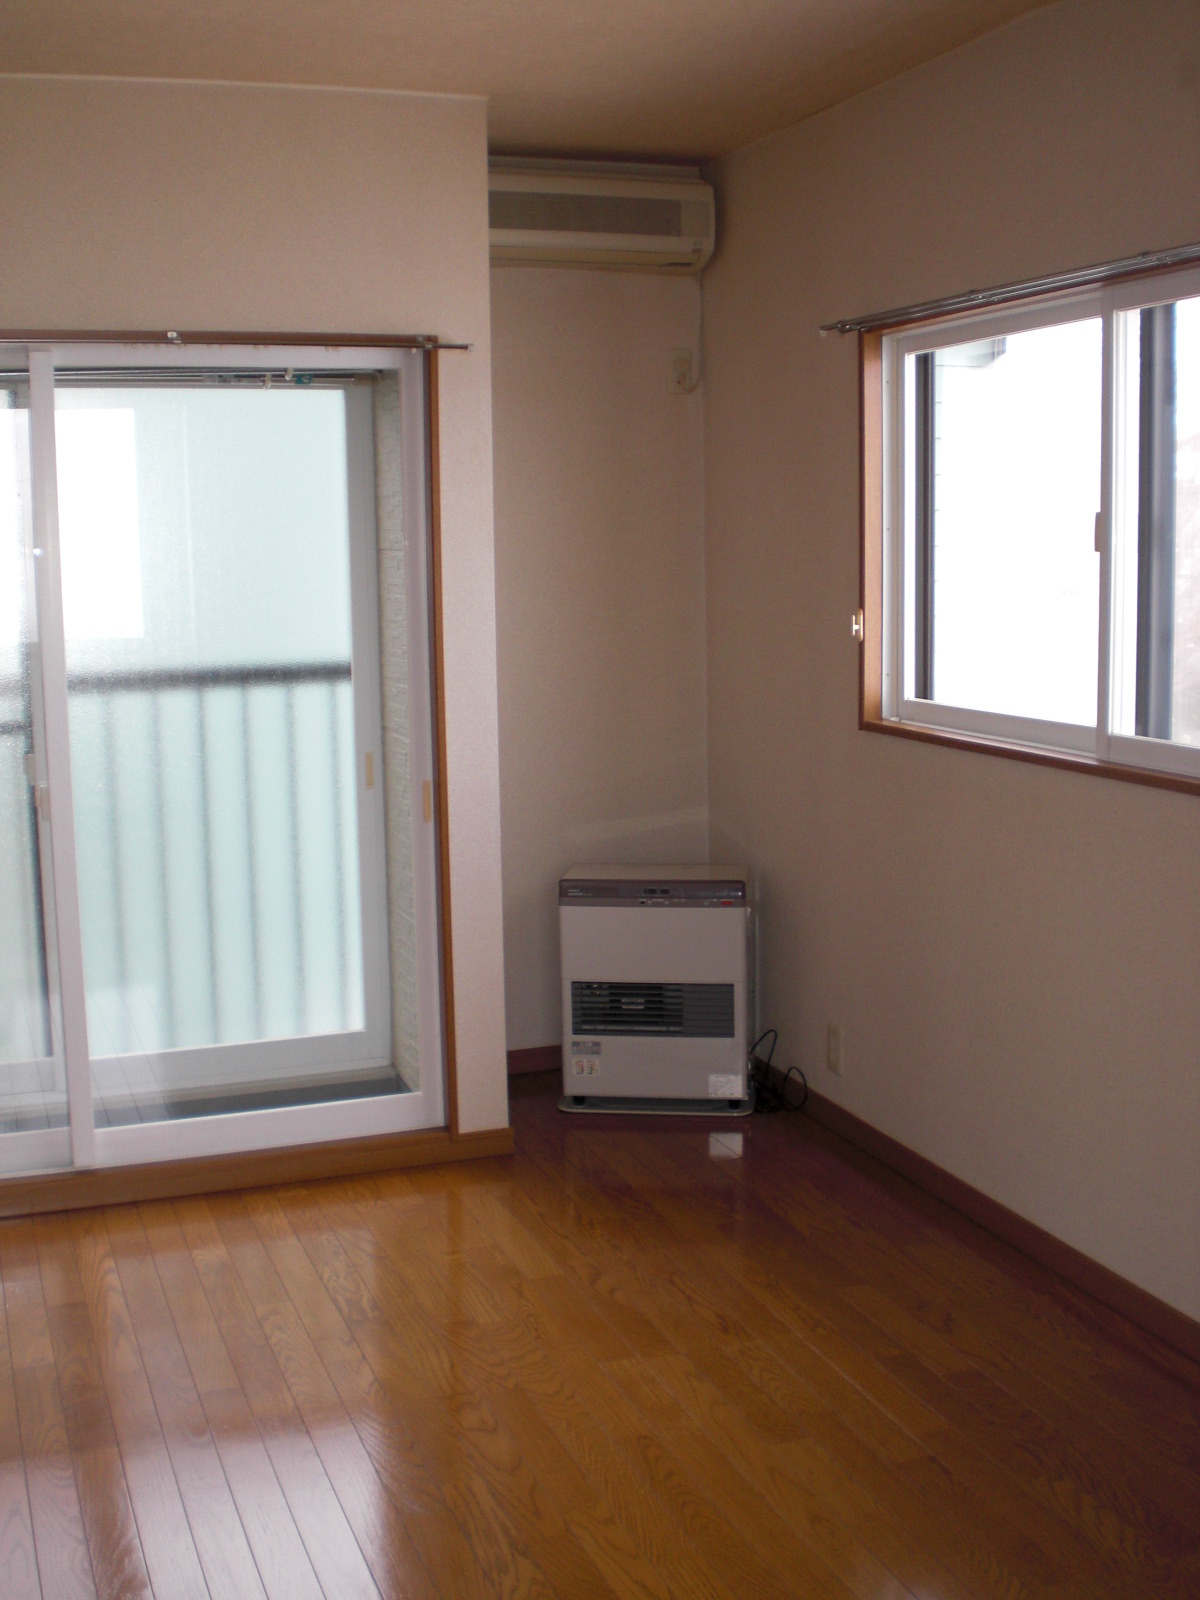 Living and room. Air conditioning and with FF stove to LDK